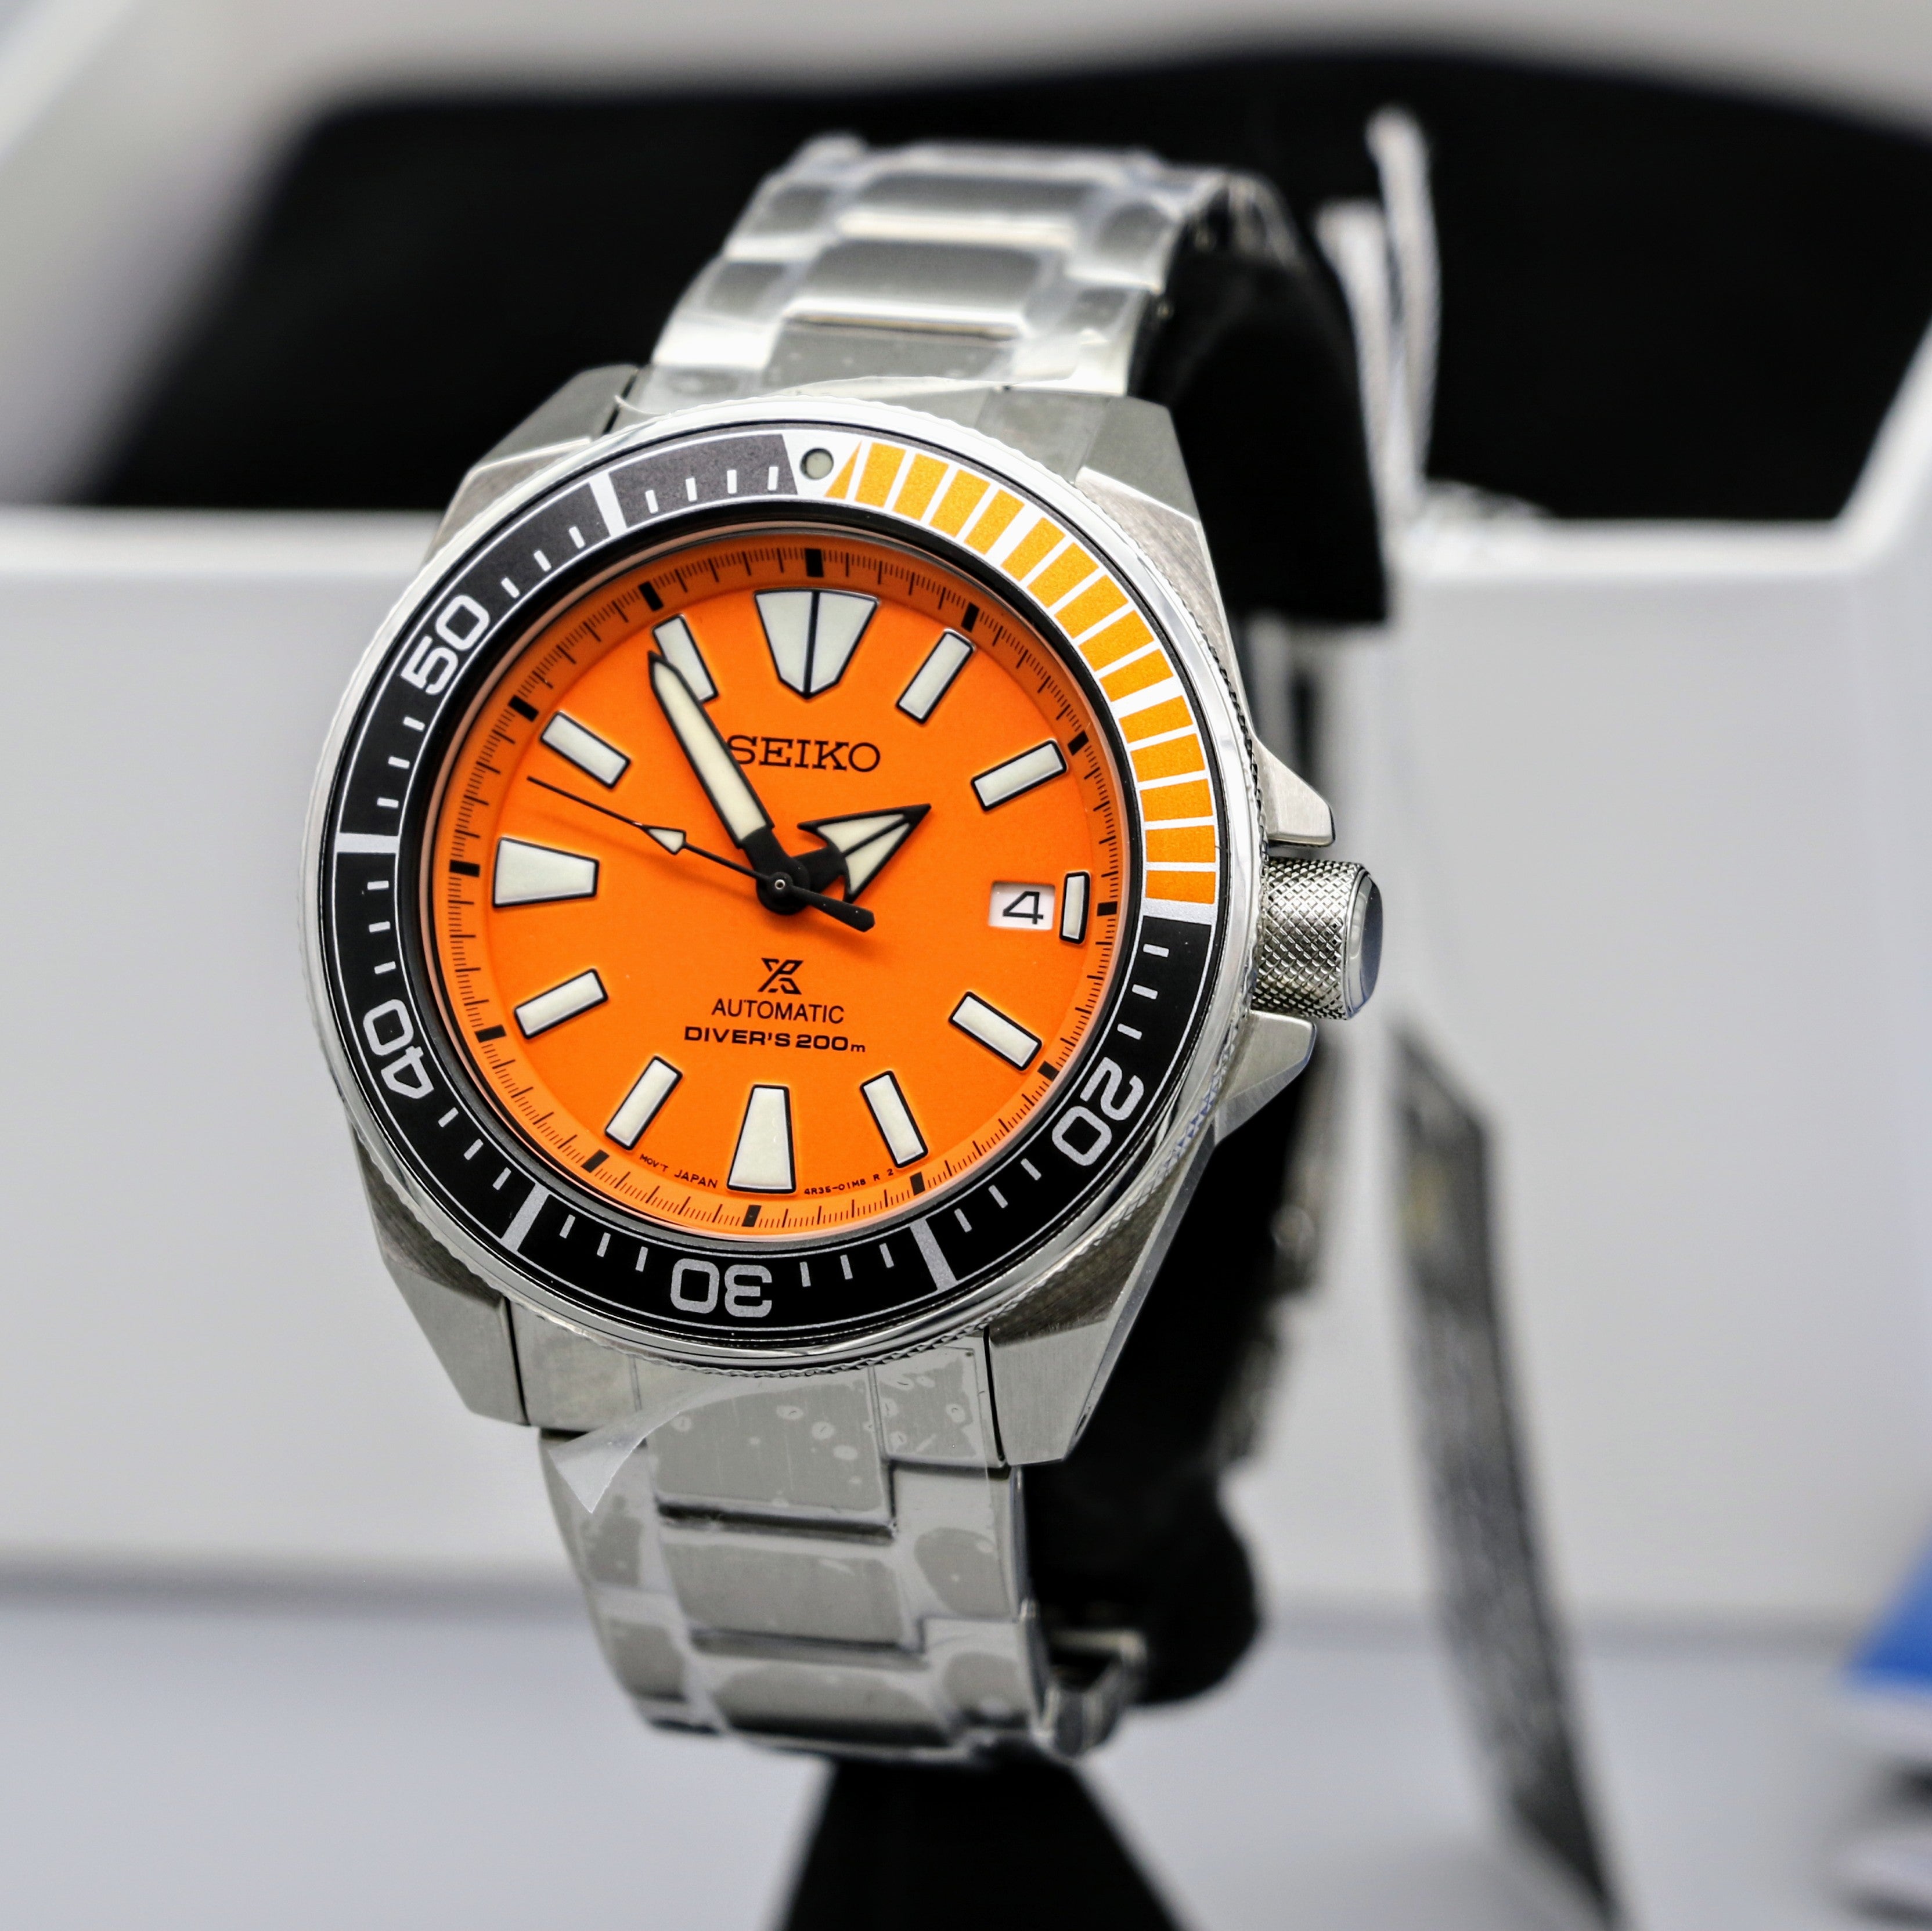 NEW W/ BOX & PAPERS SEIKO Prospex Automatic Diver's Wristwatch DISCONT –  SECOND HAND HOROLOGY